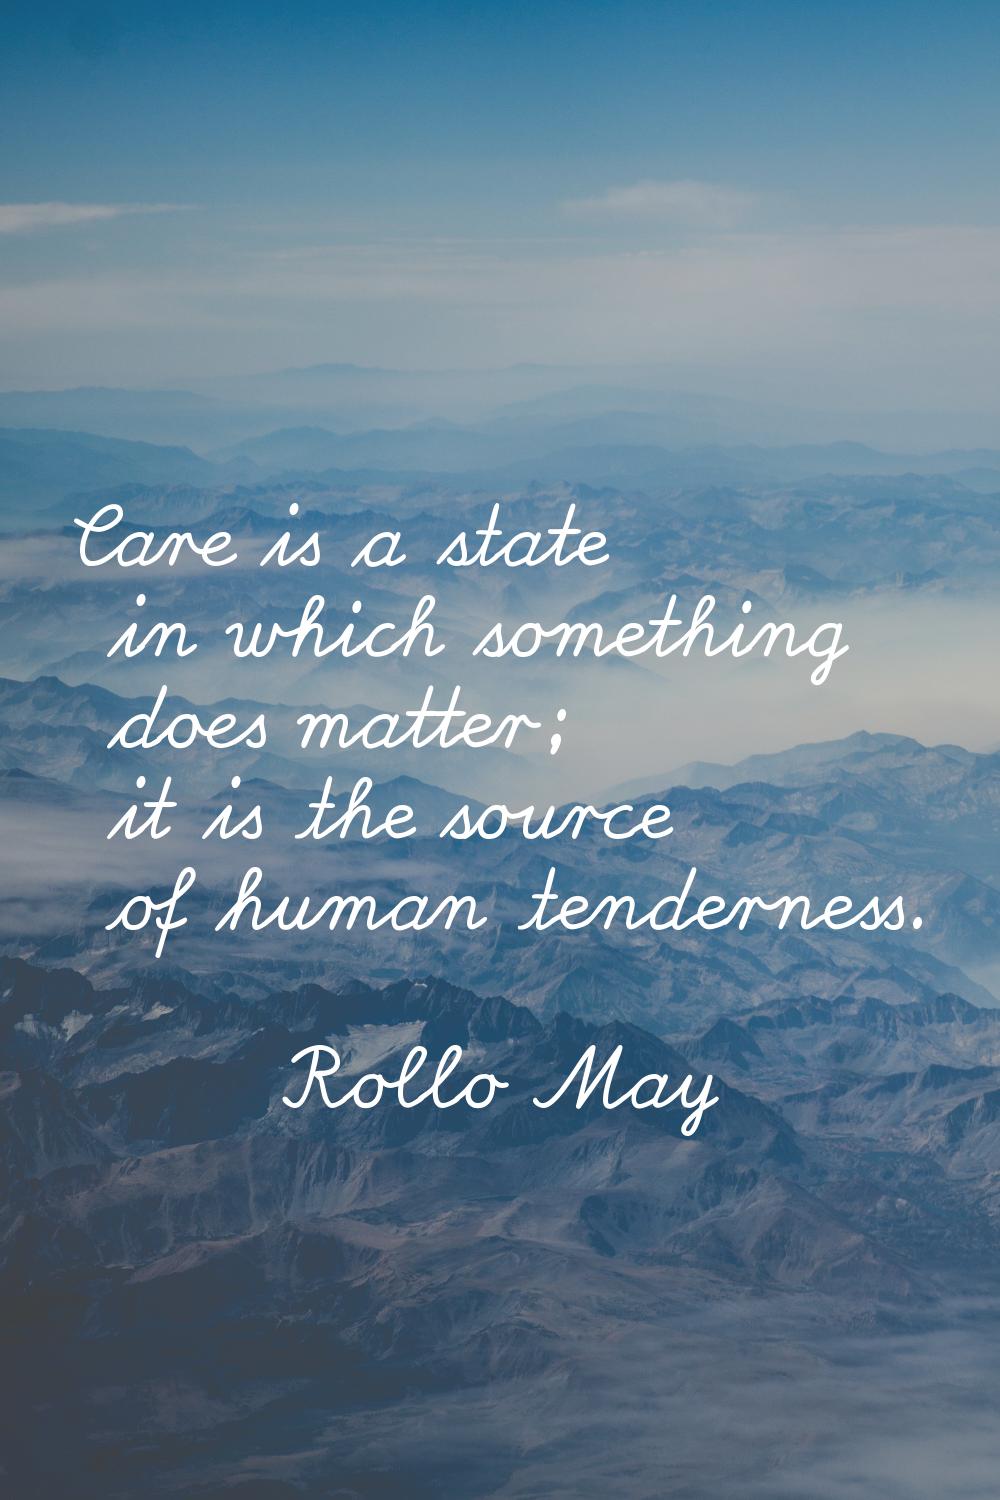 Care is a state in which something does matter; it is the source of human tenderness.